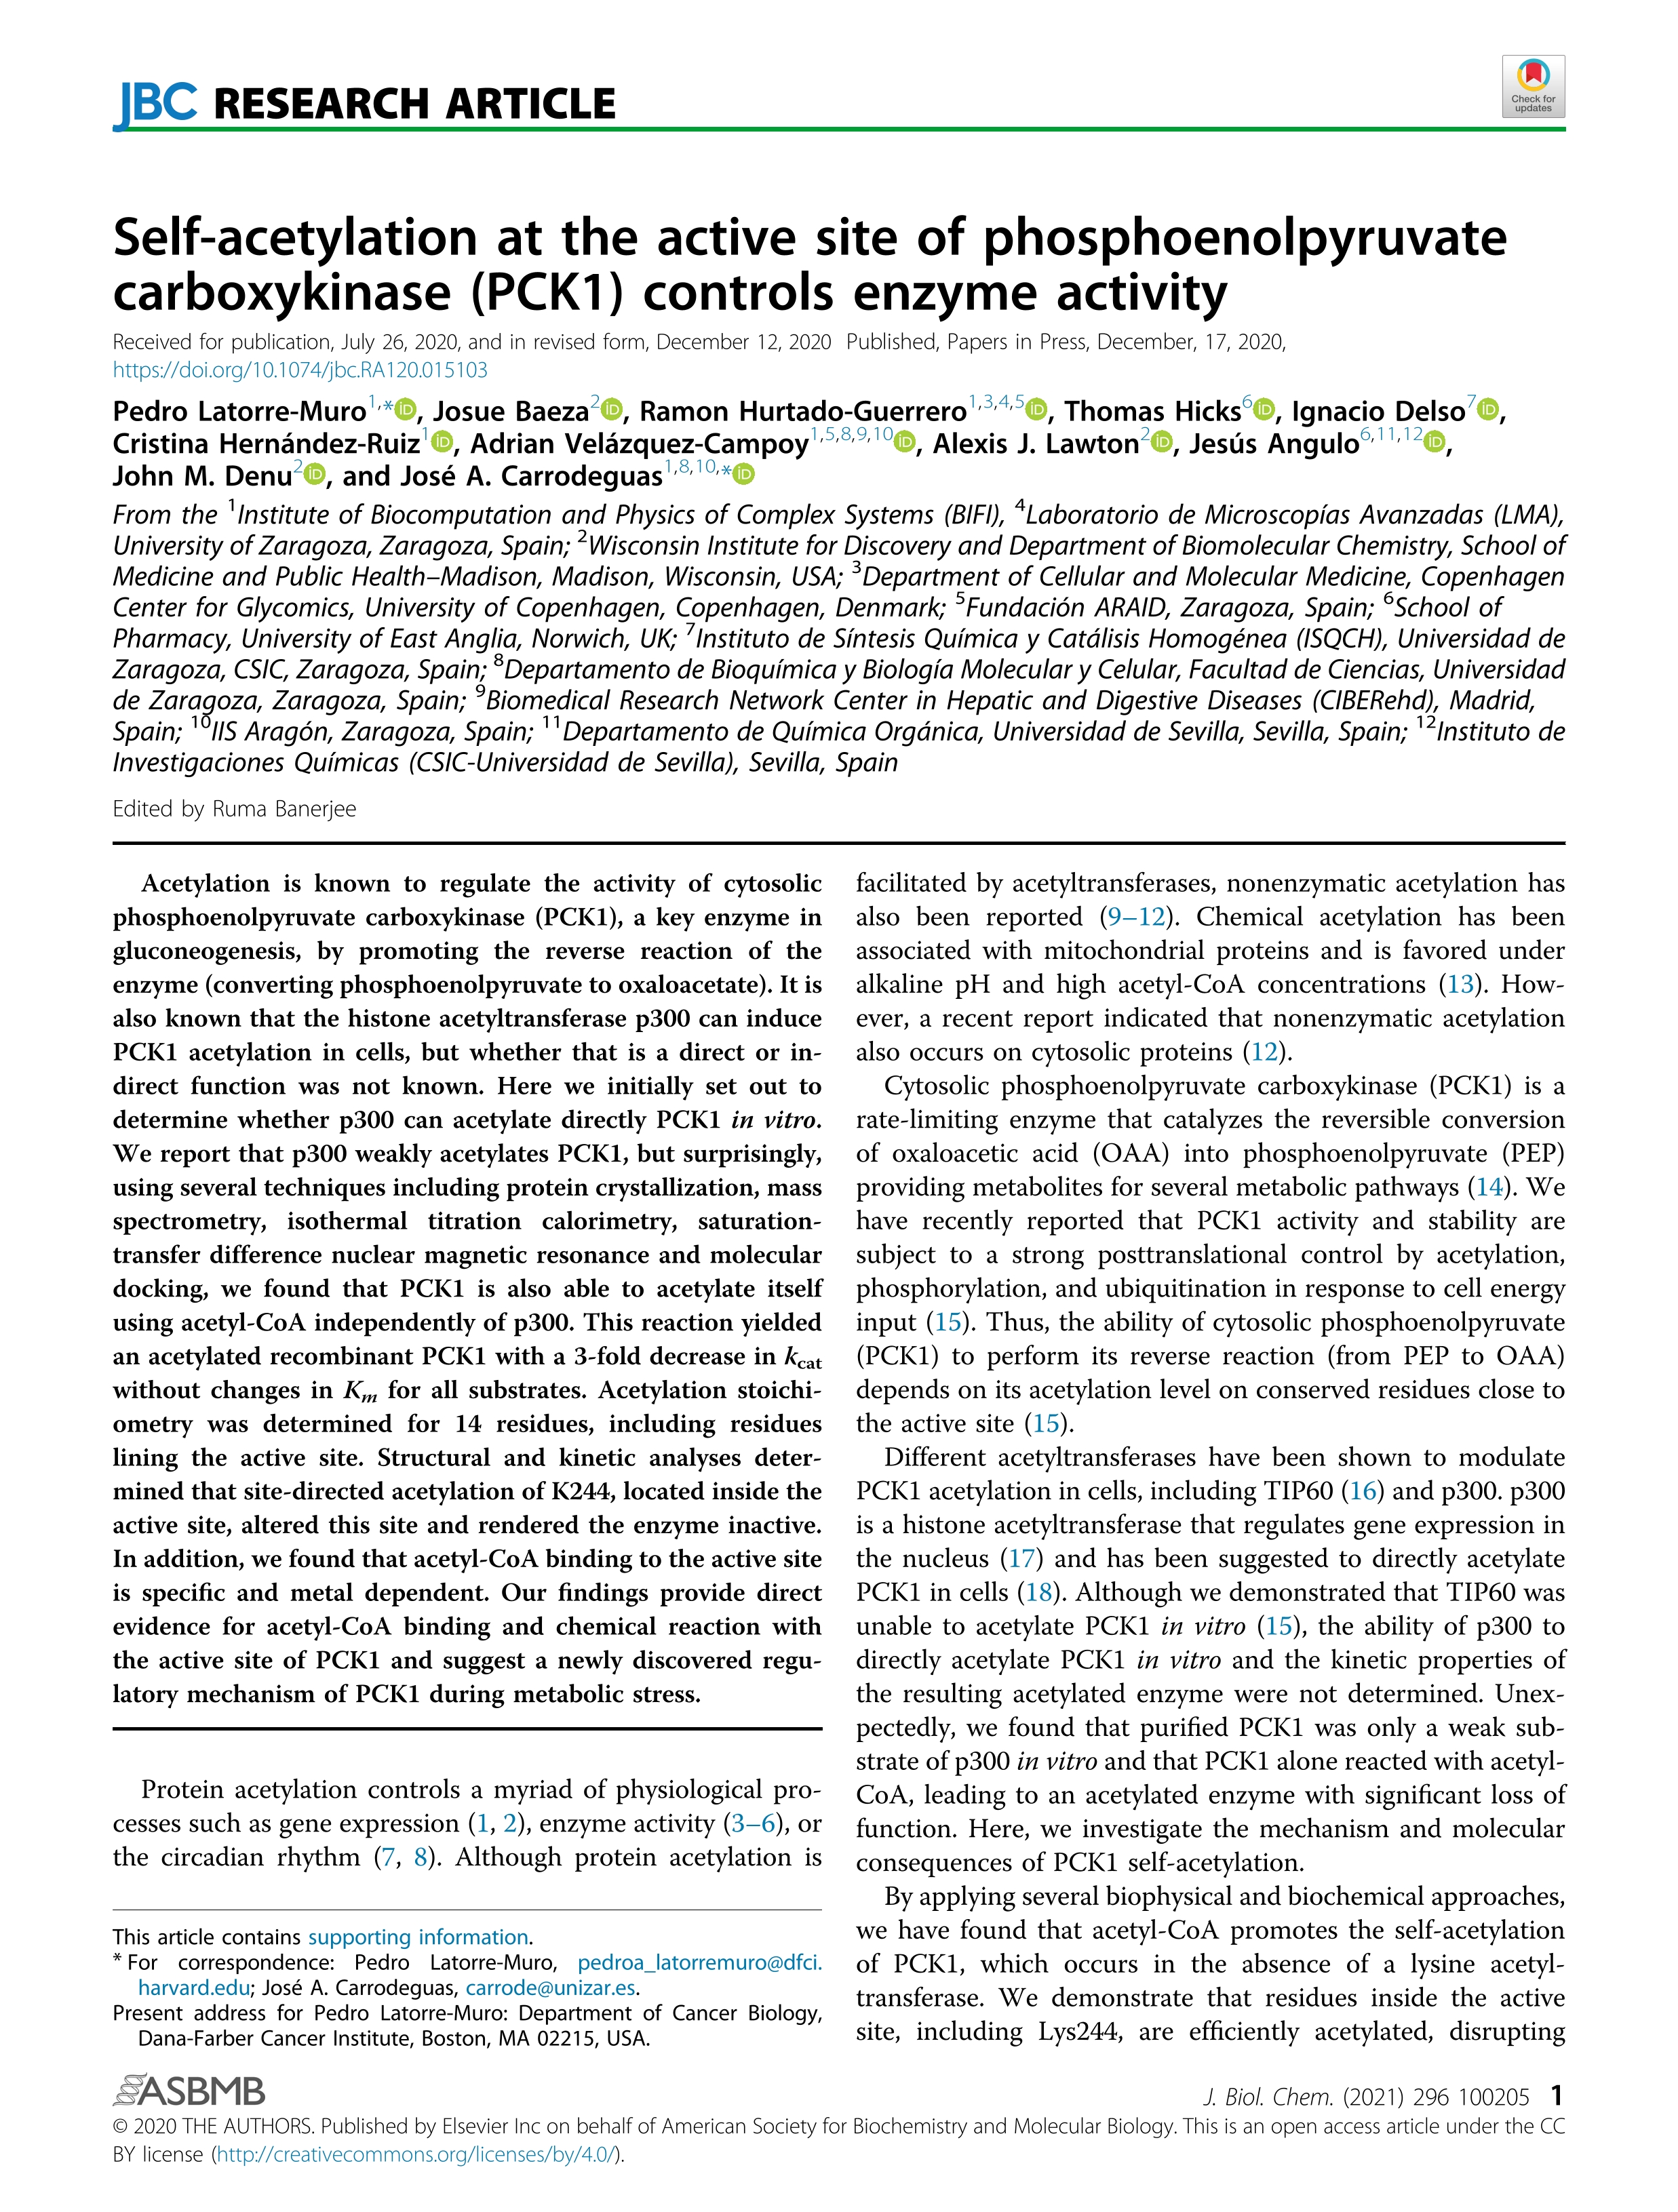 Self-acetylation at the active site of phosphoenolpyruvate carboxykinase (PCK1) controls enzyme activity